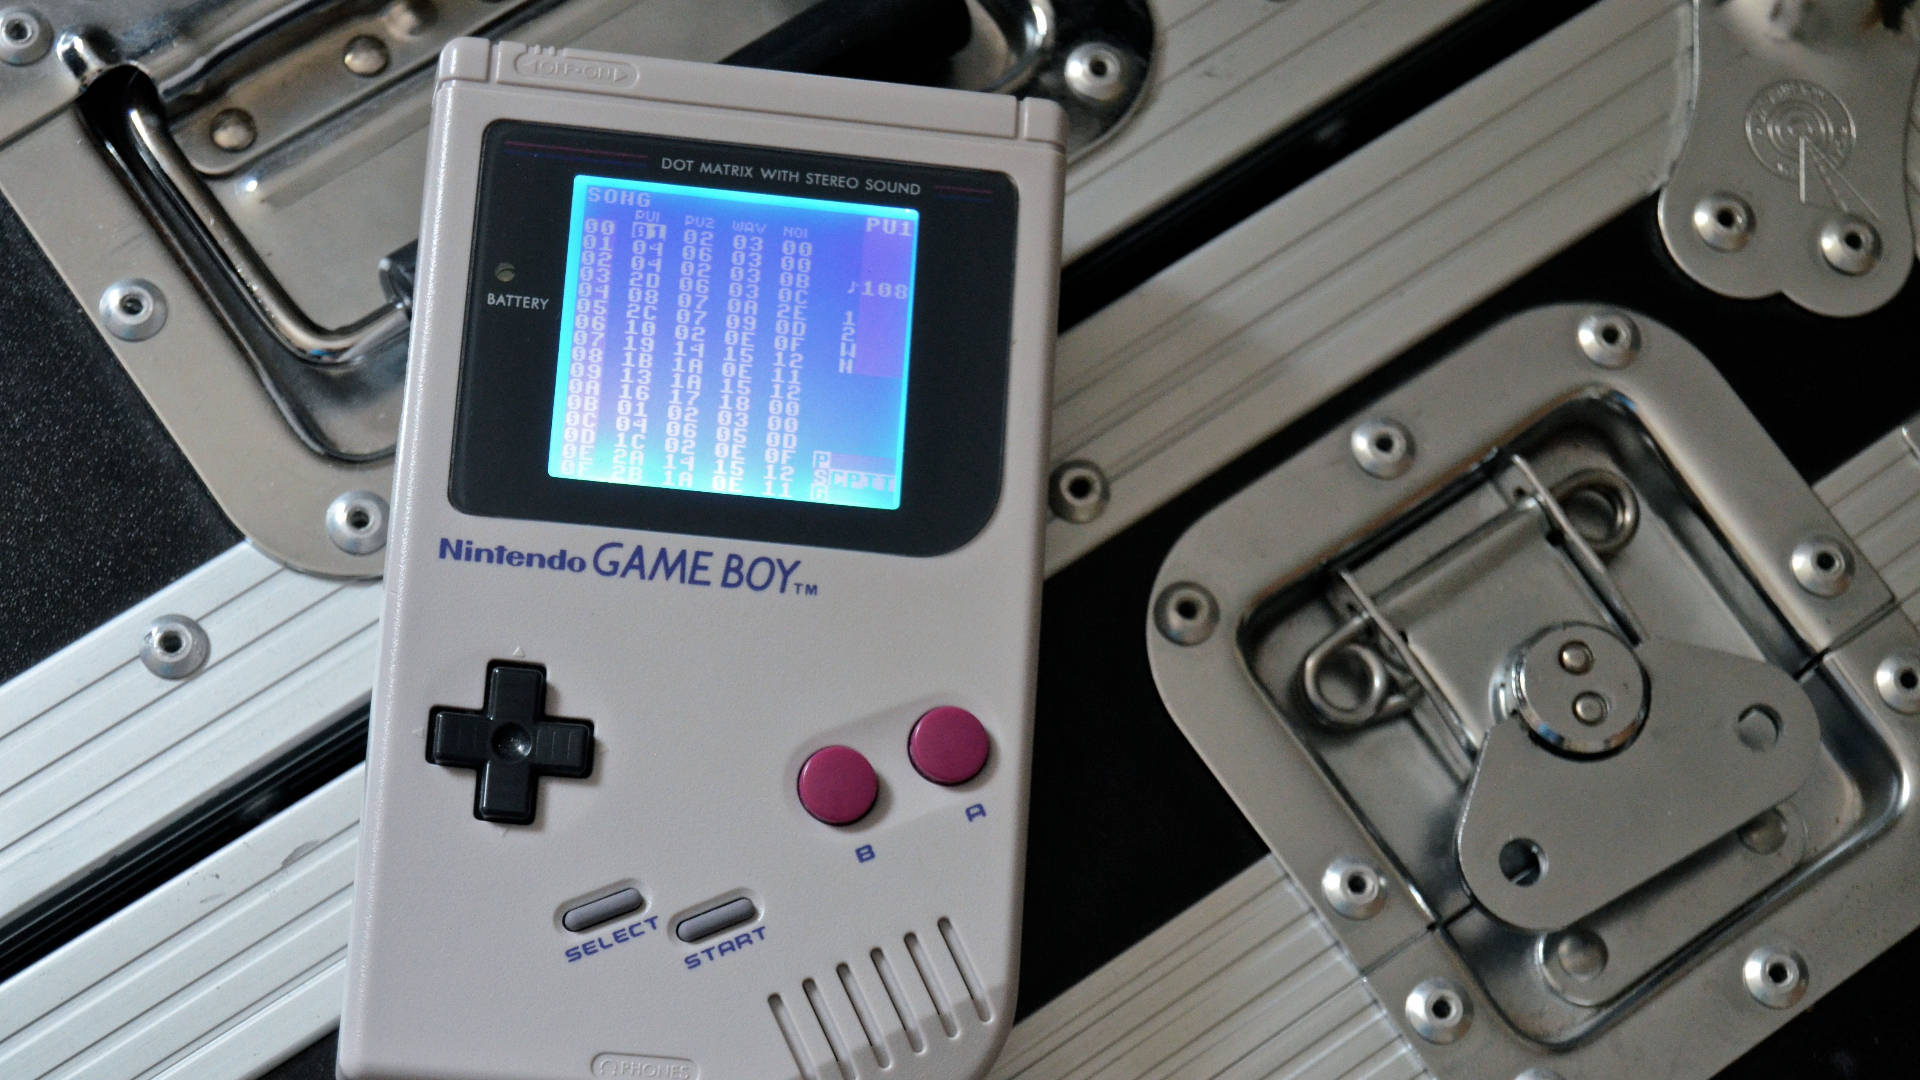 Top 999+ Game Boy Wallpapers Full HD, 4K✅Free to Use